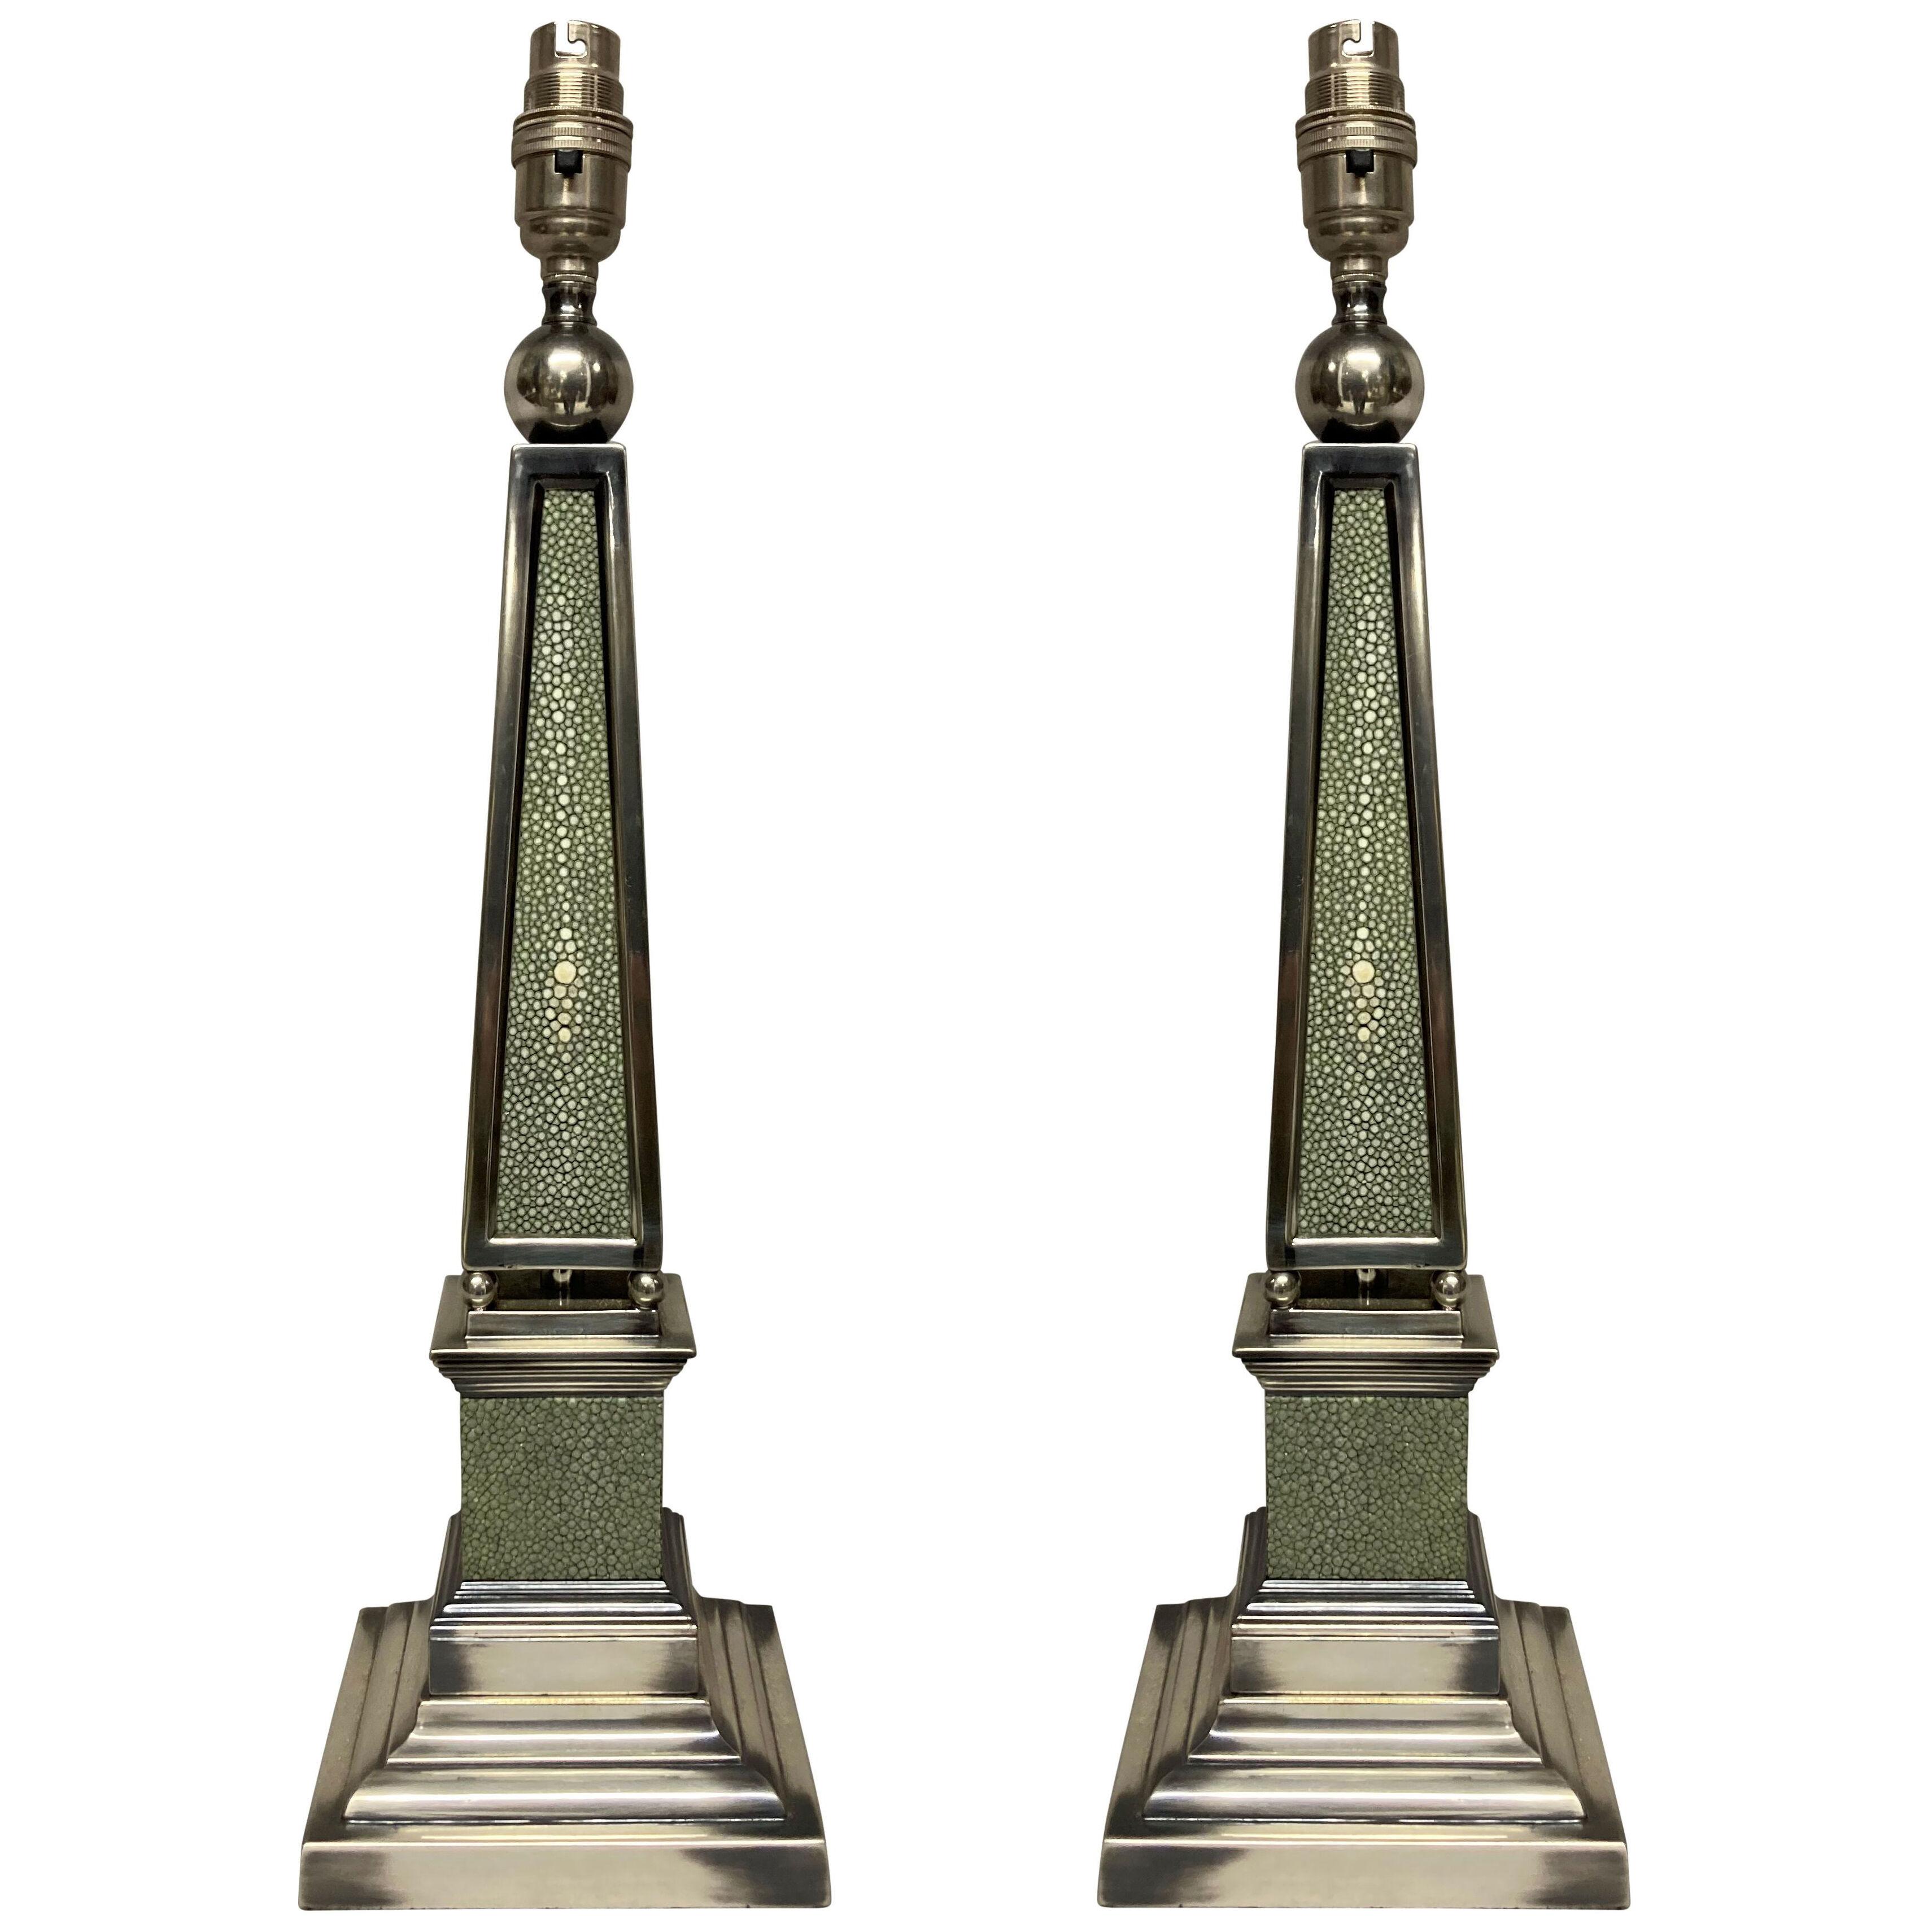 A PAIR OF SILVER PLATED OBELISK LAMPS